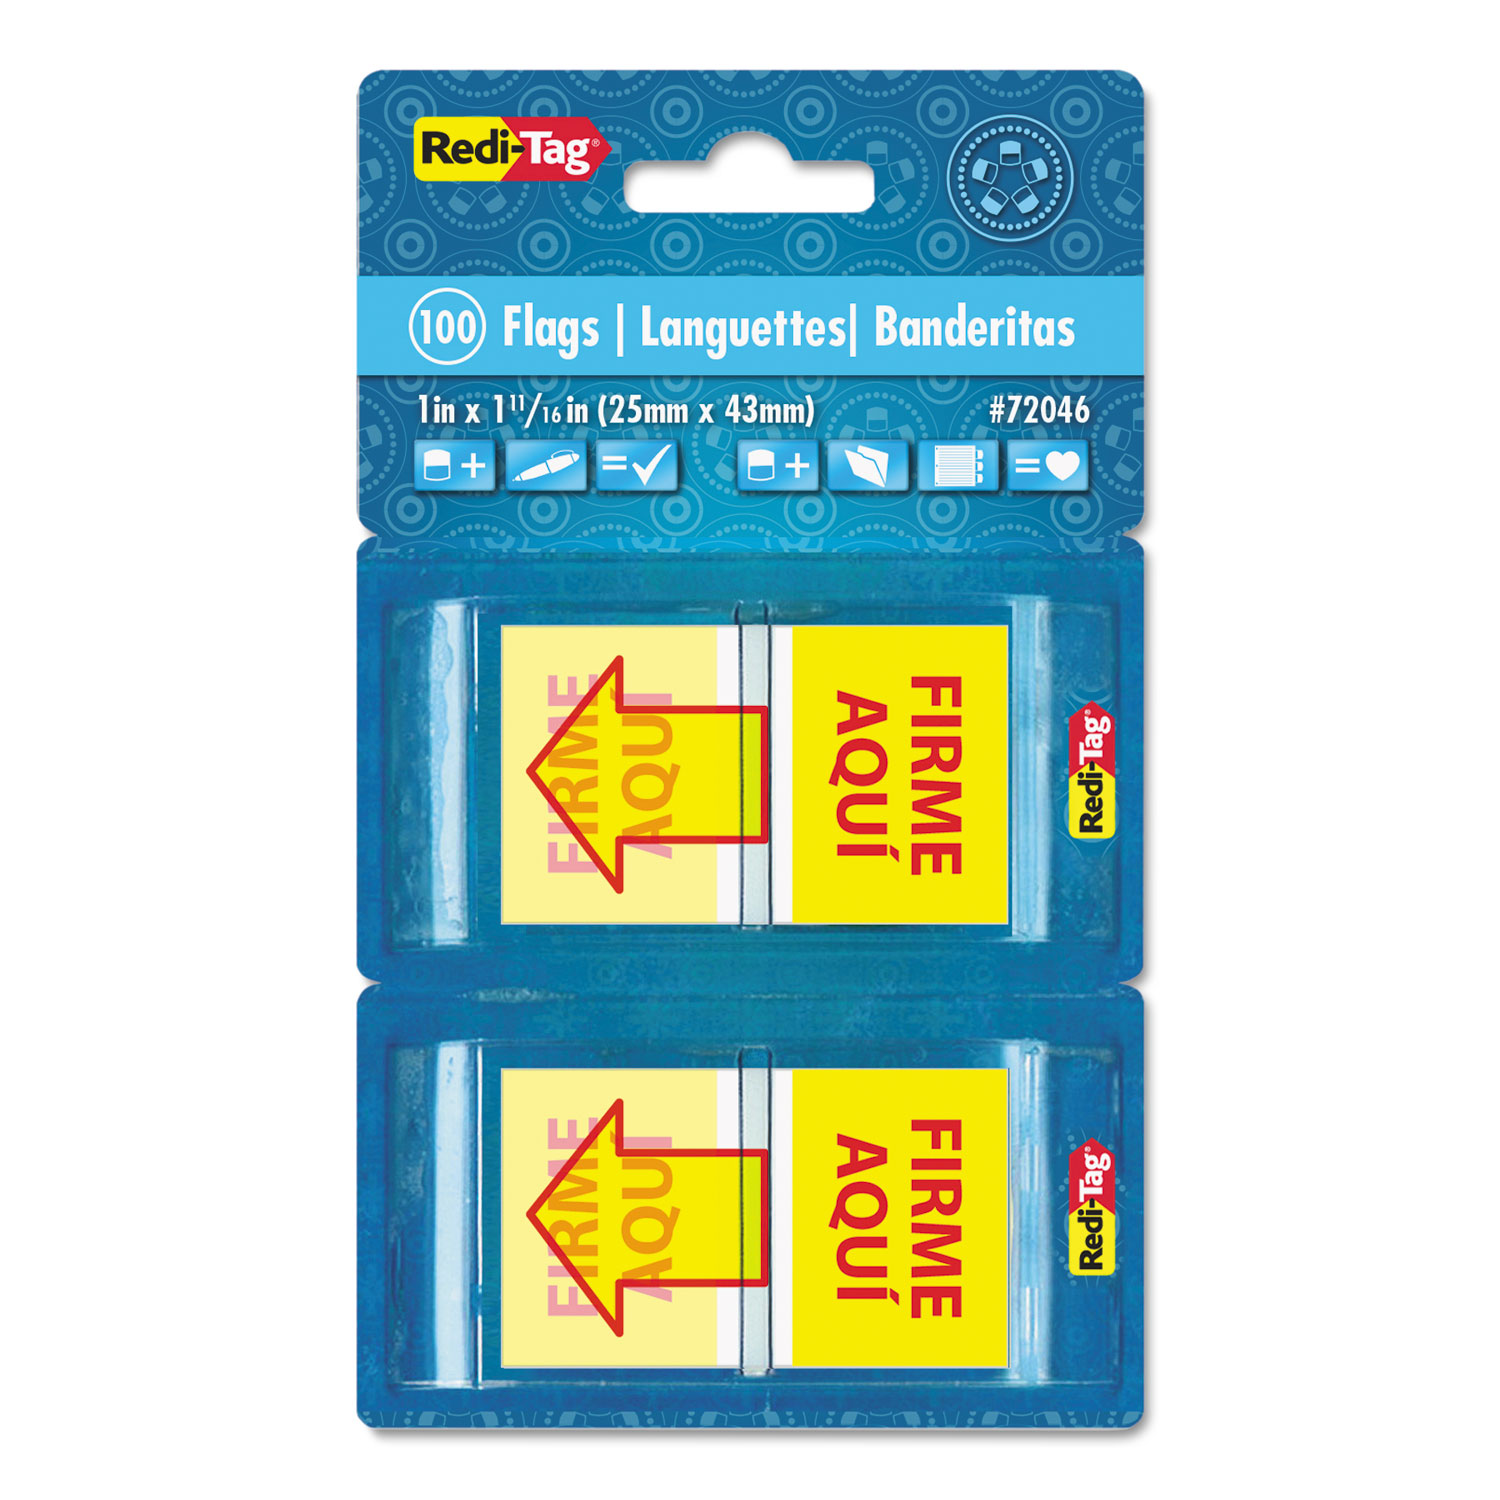  Redi-Tag 72046 Spanish Page Flags in Pop-Up Dispenser, FIRME AQUl, Red/Yellow, 100/Pack (RTG72046) 